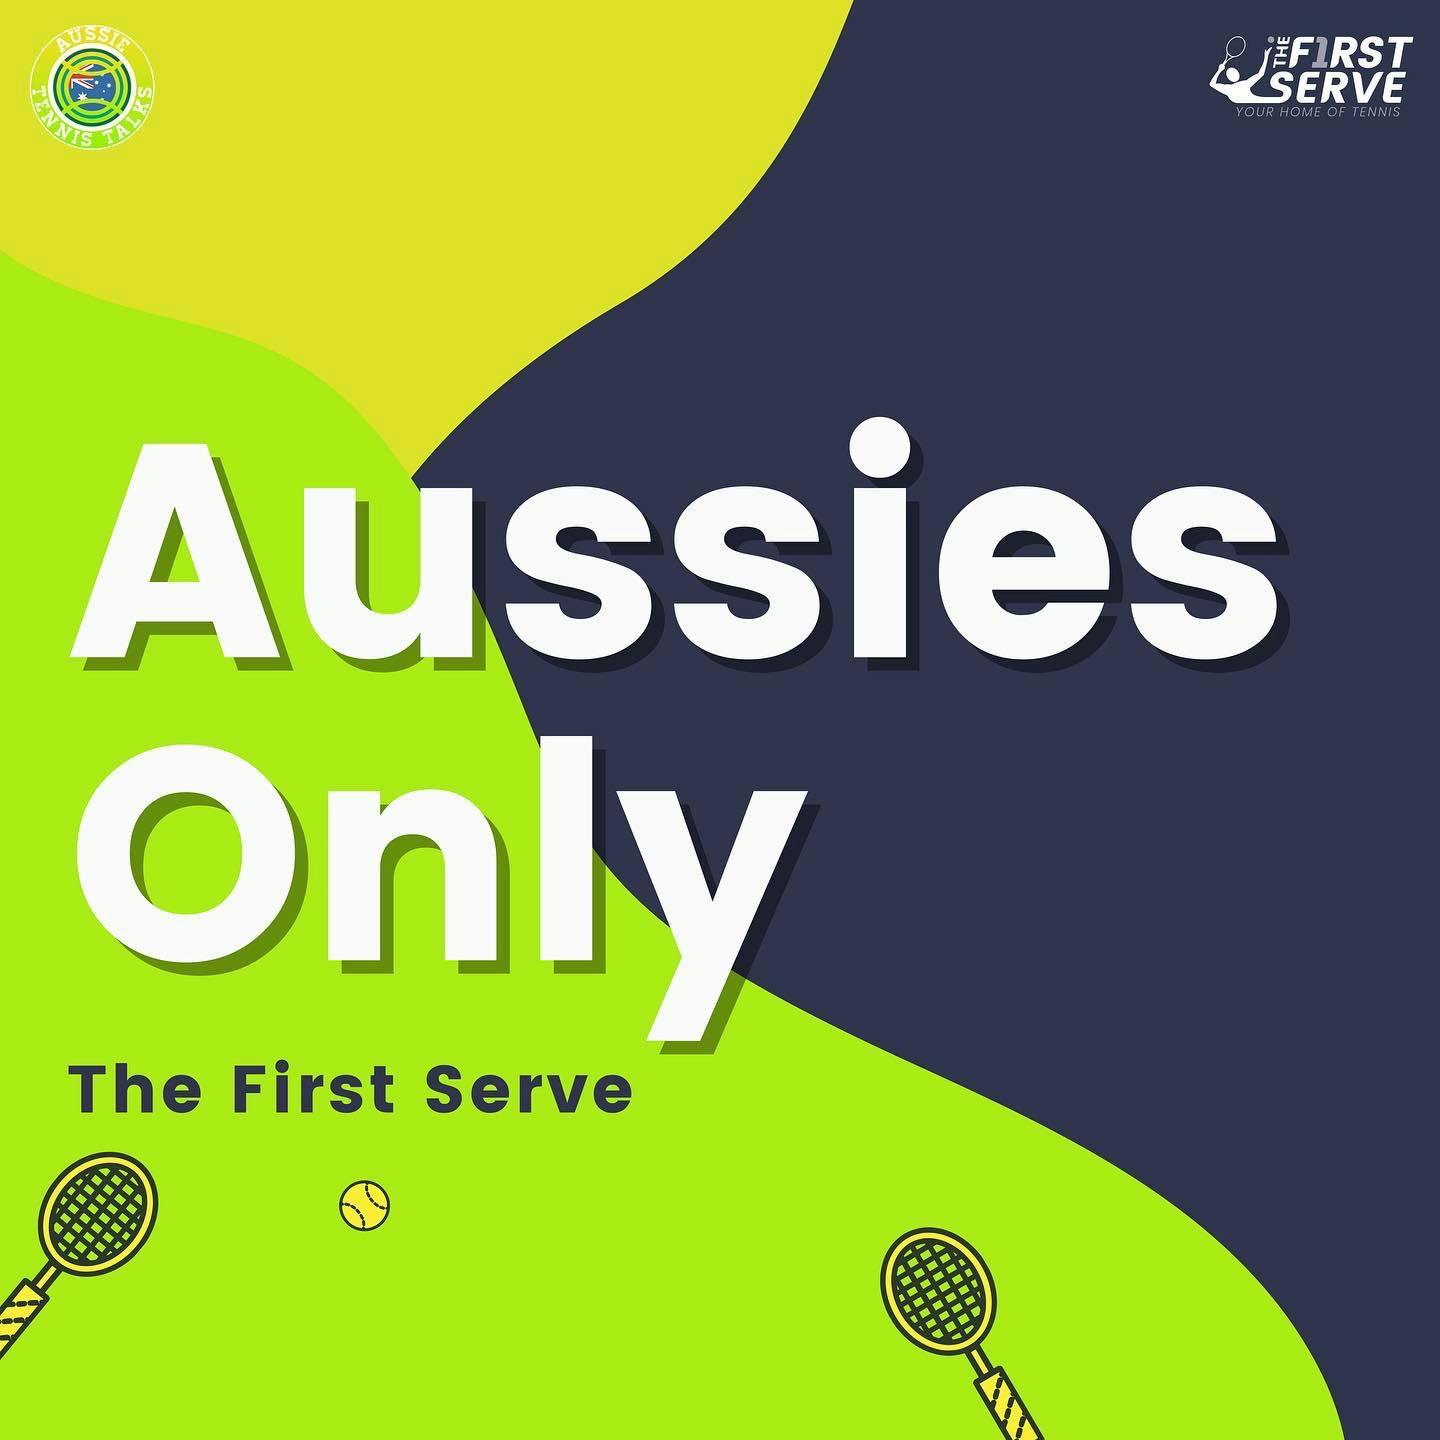 Aussies Only: S03 E08 Dianne Balestrat